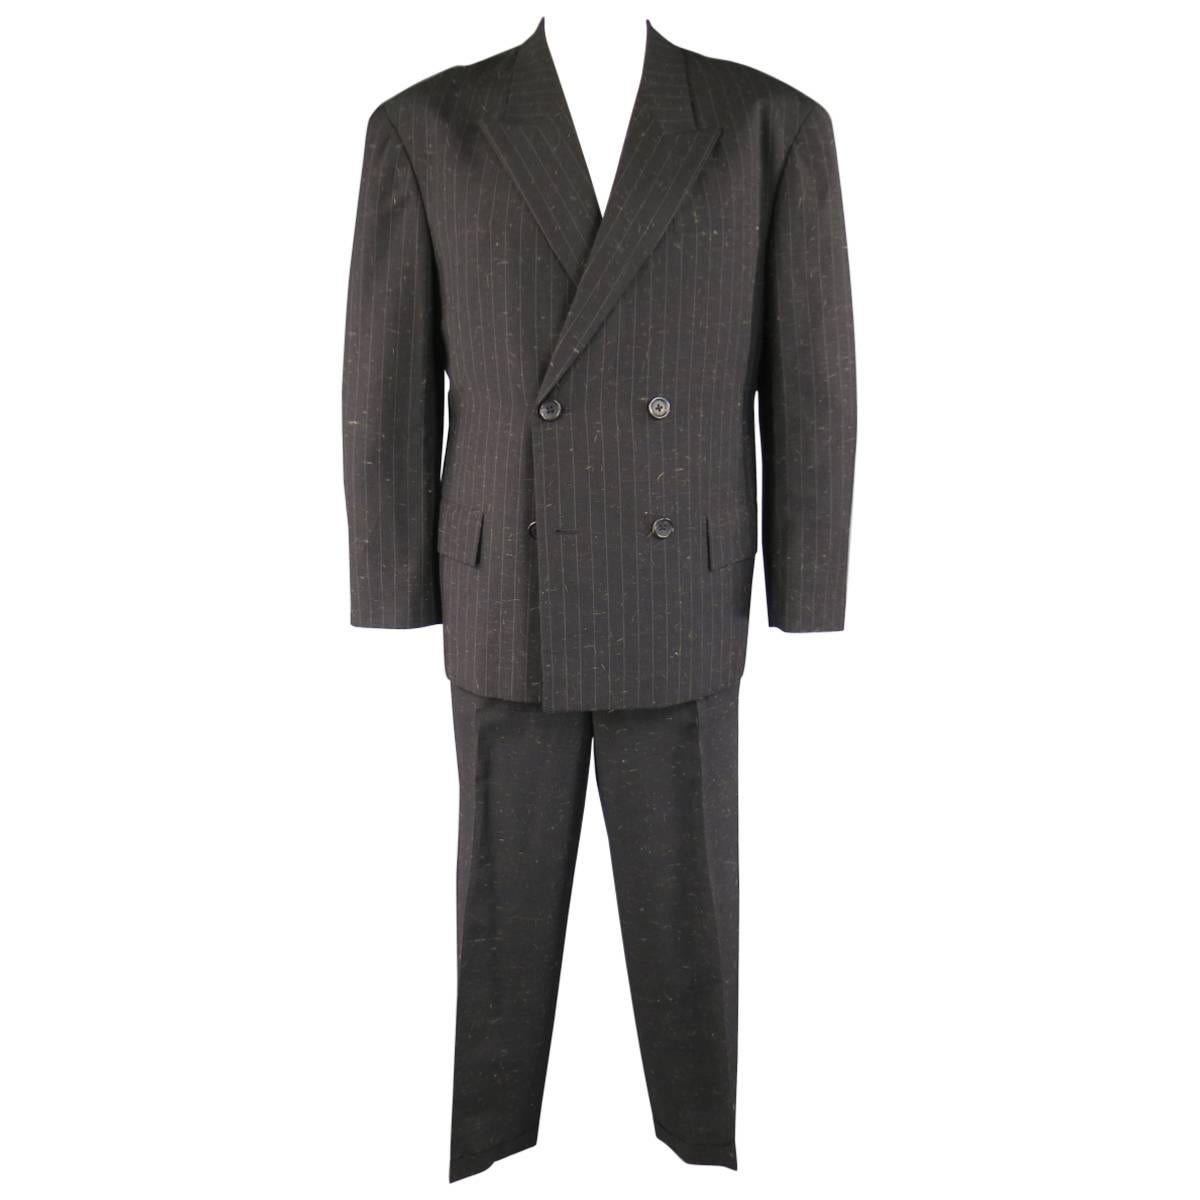 Yohji Yamamoto Charcoal Hair Textured Wool Blend Striped Double Breasted Suit